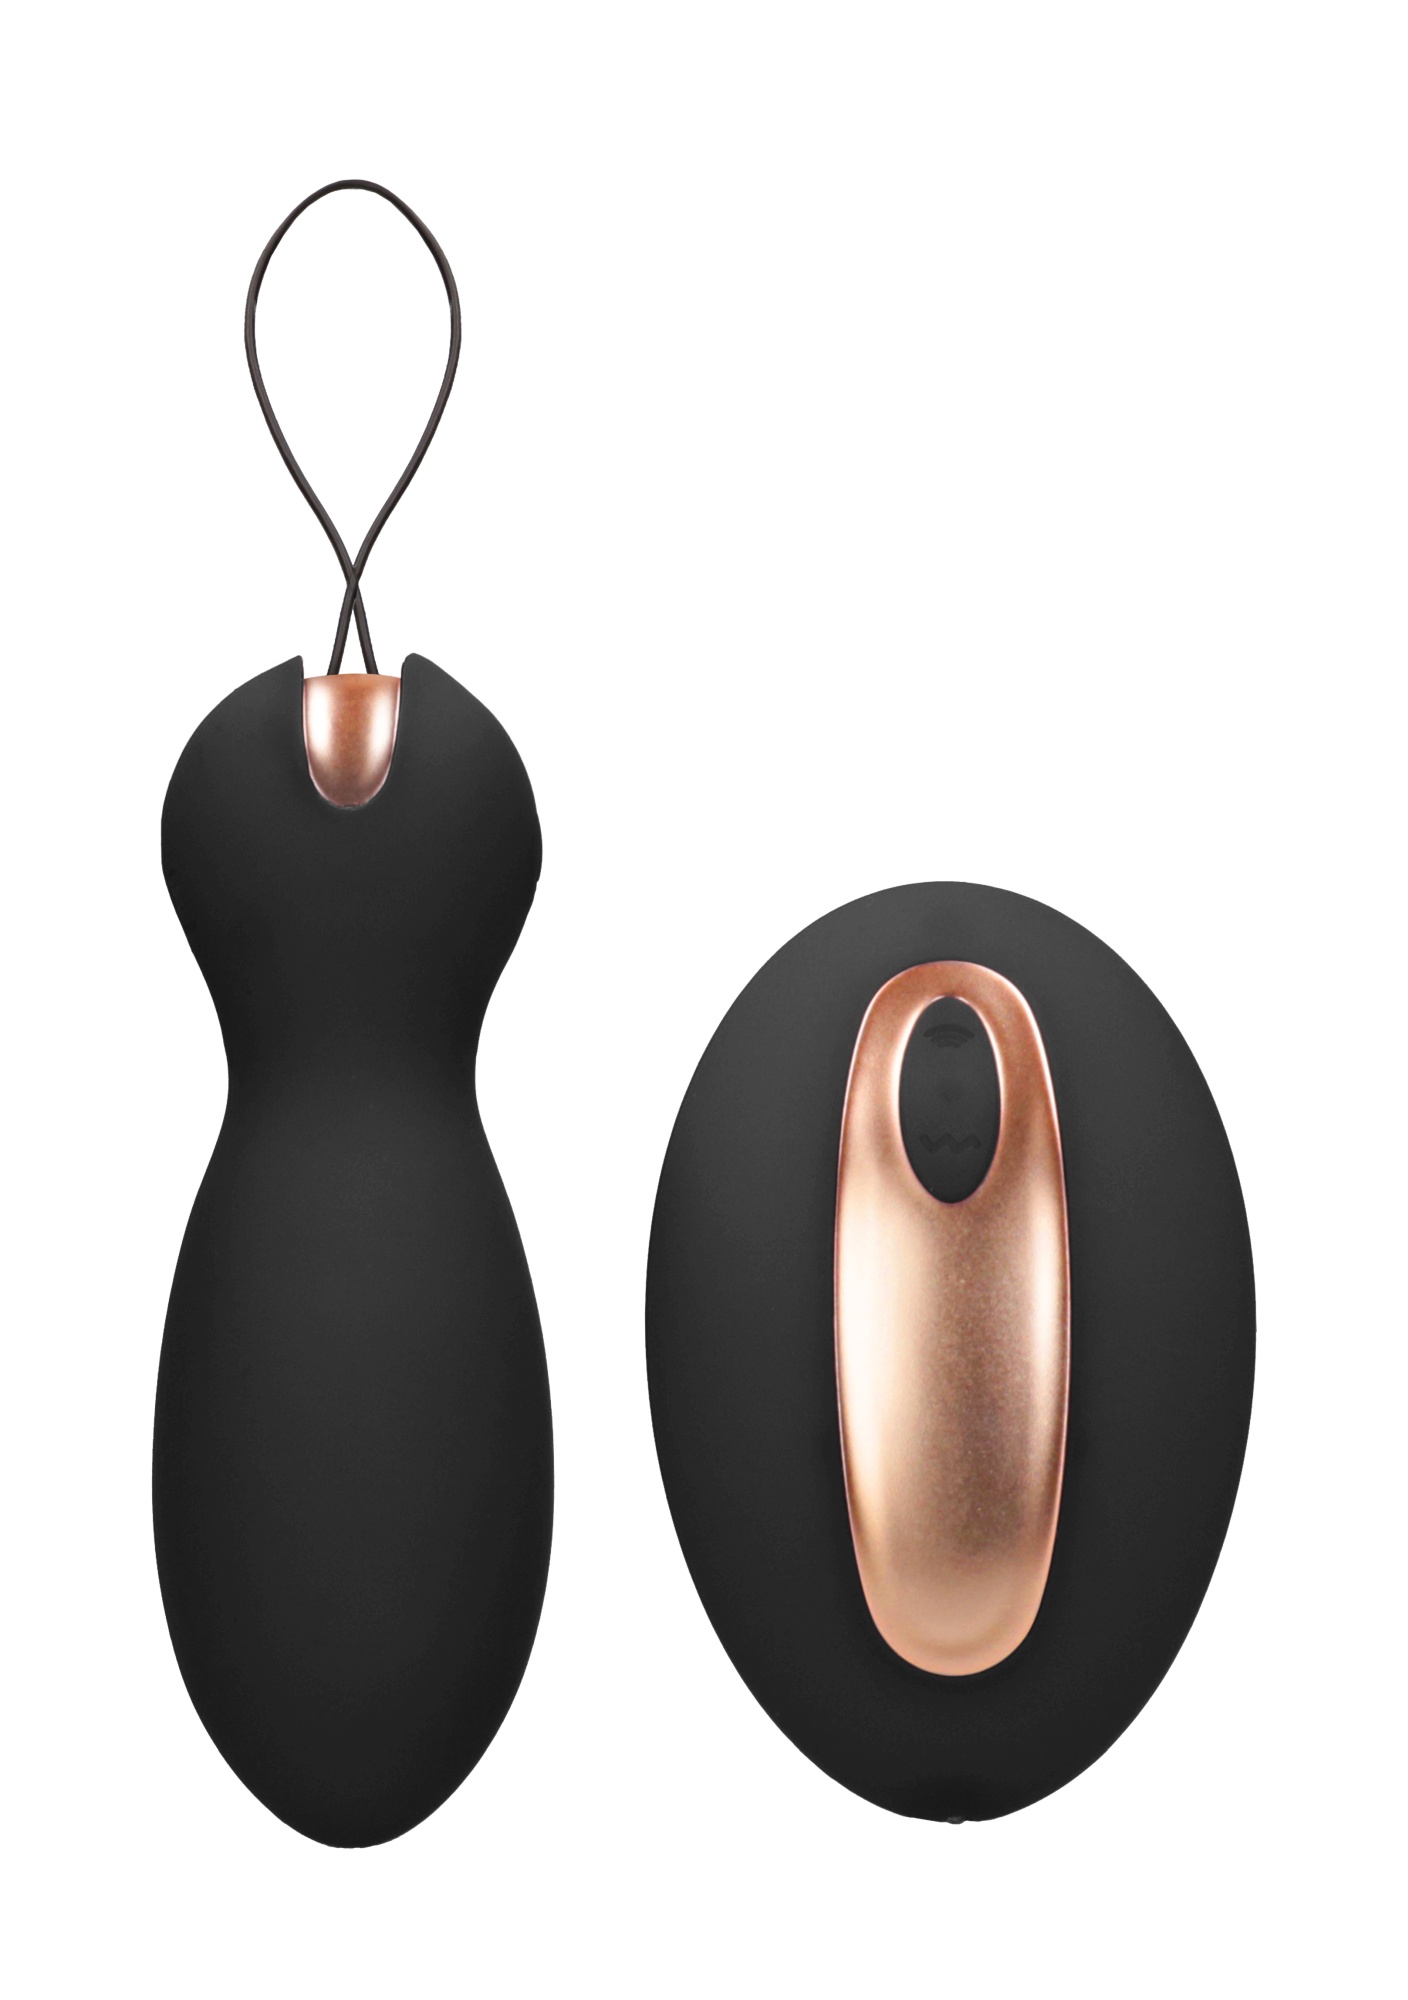 Dual Vibrating Toy – Purity – Black